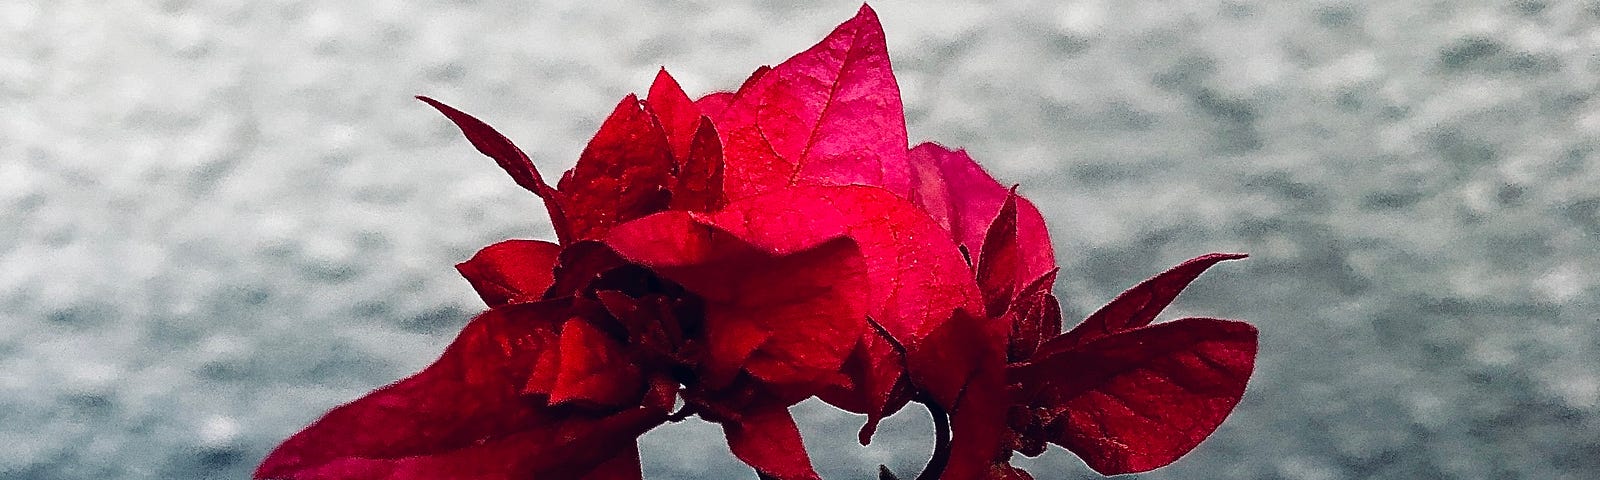 image of a blooming bougainvillea rising from the blues